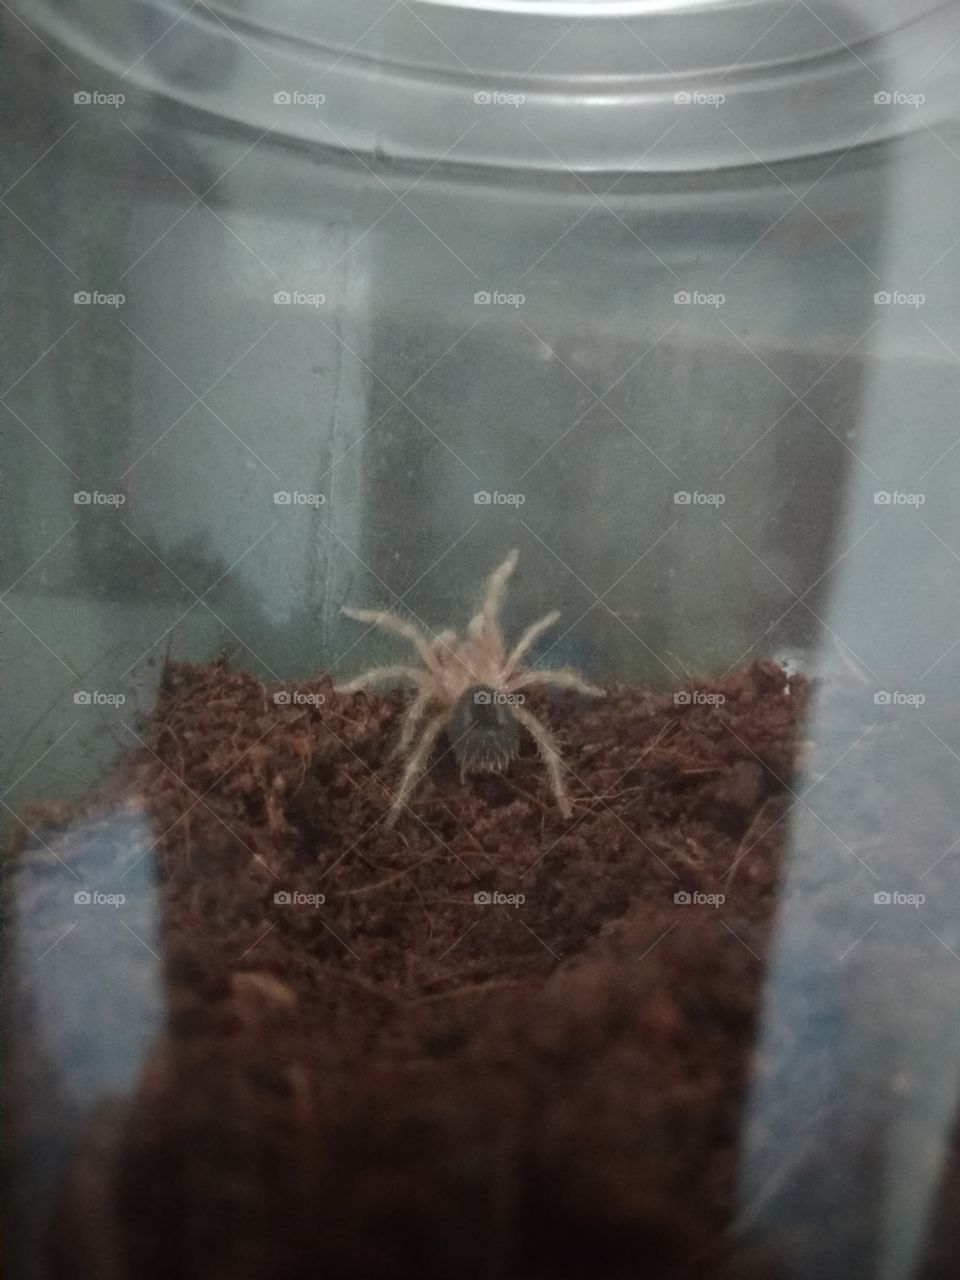 waiting for it to molt